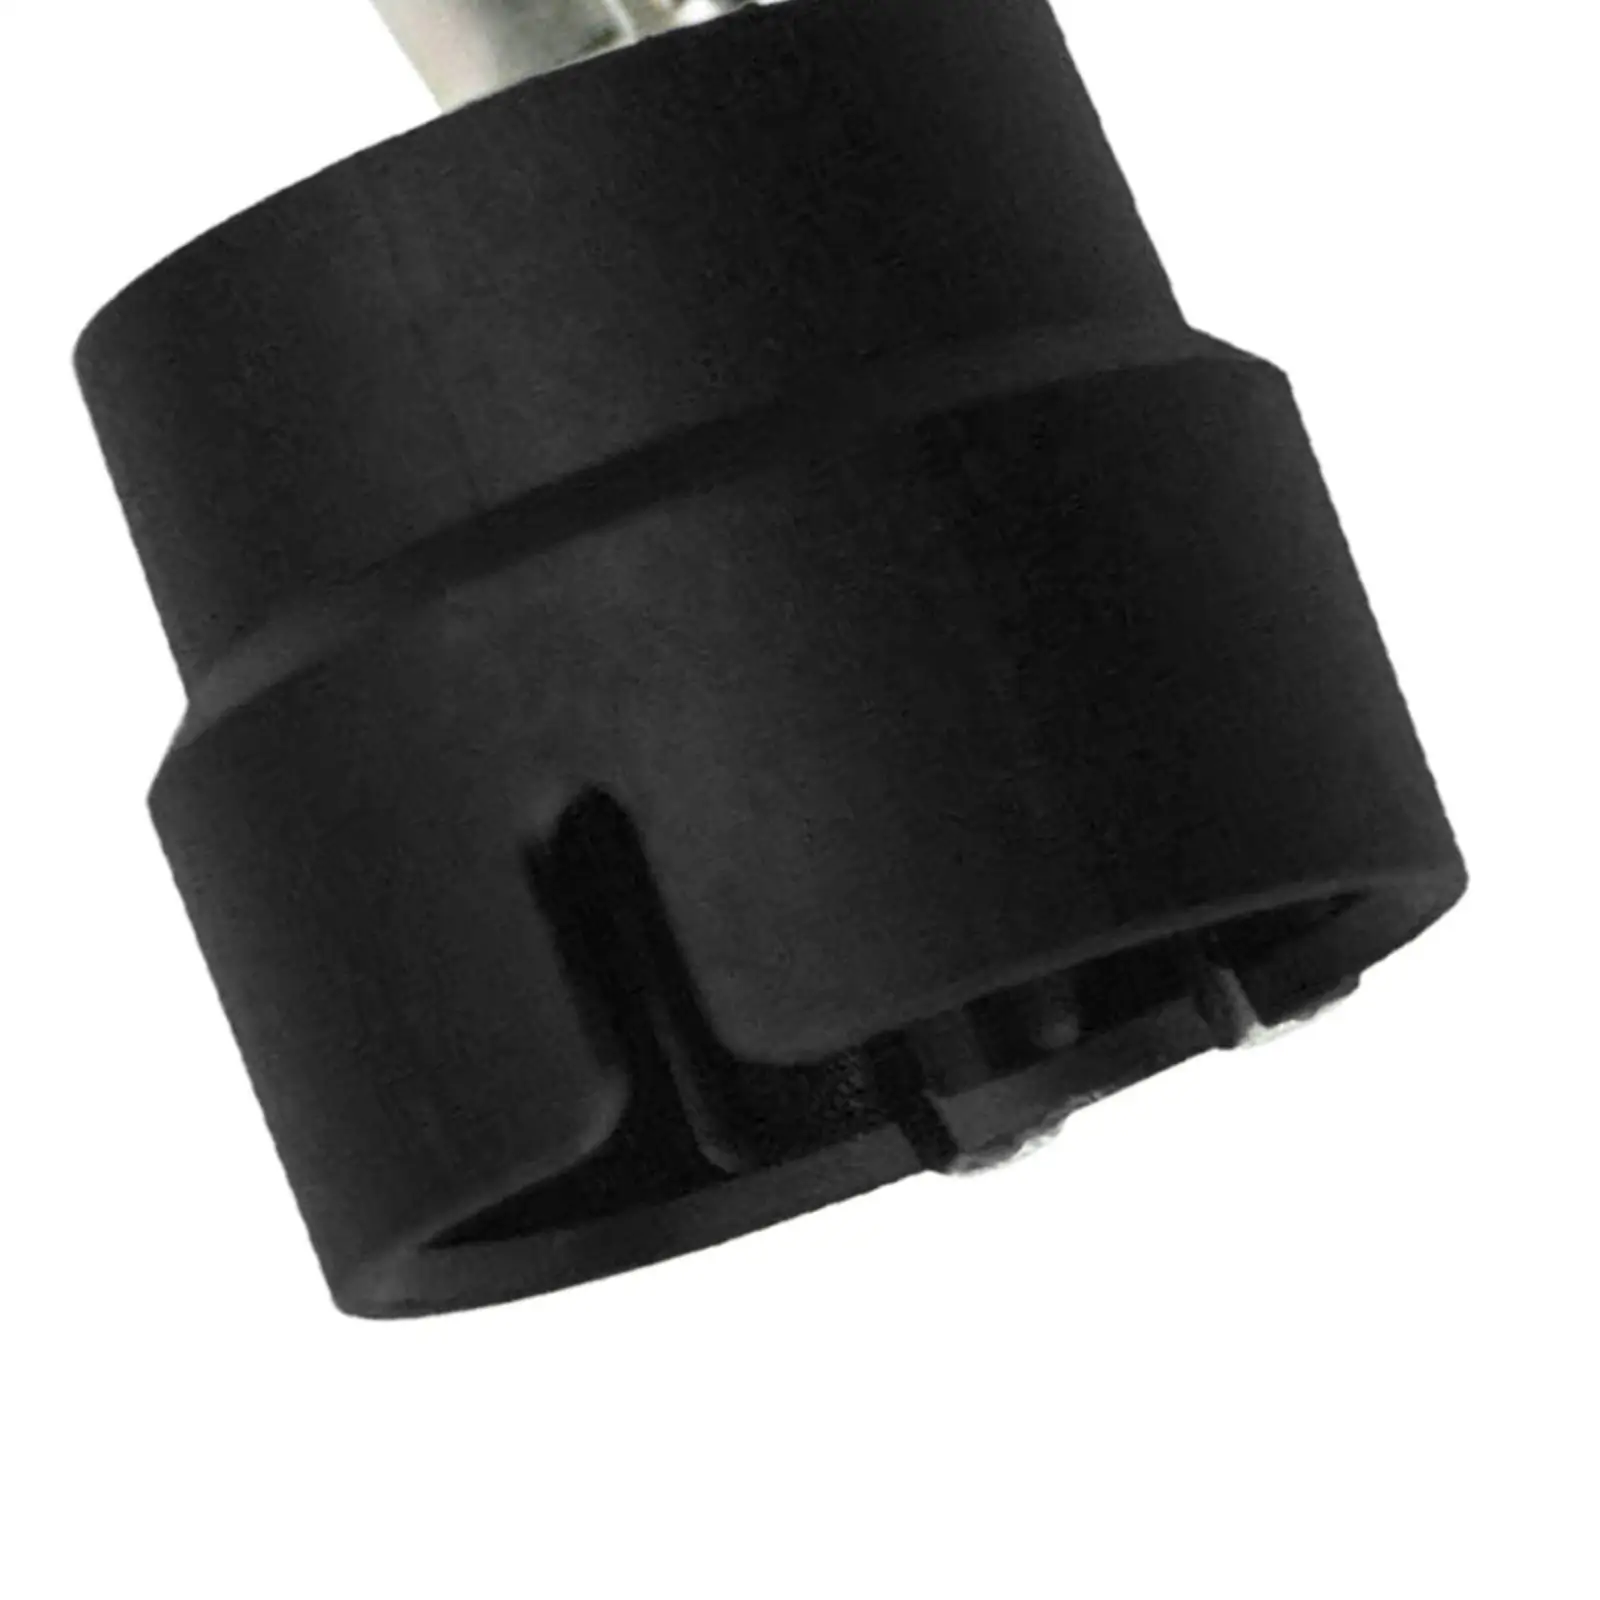 Plug Holder Easy to Install Adapter Holder Durable